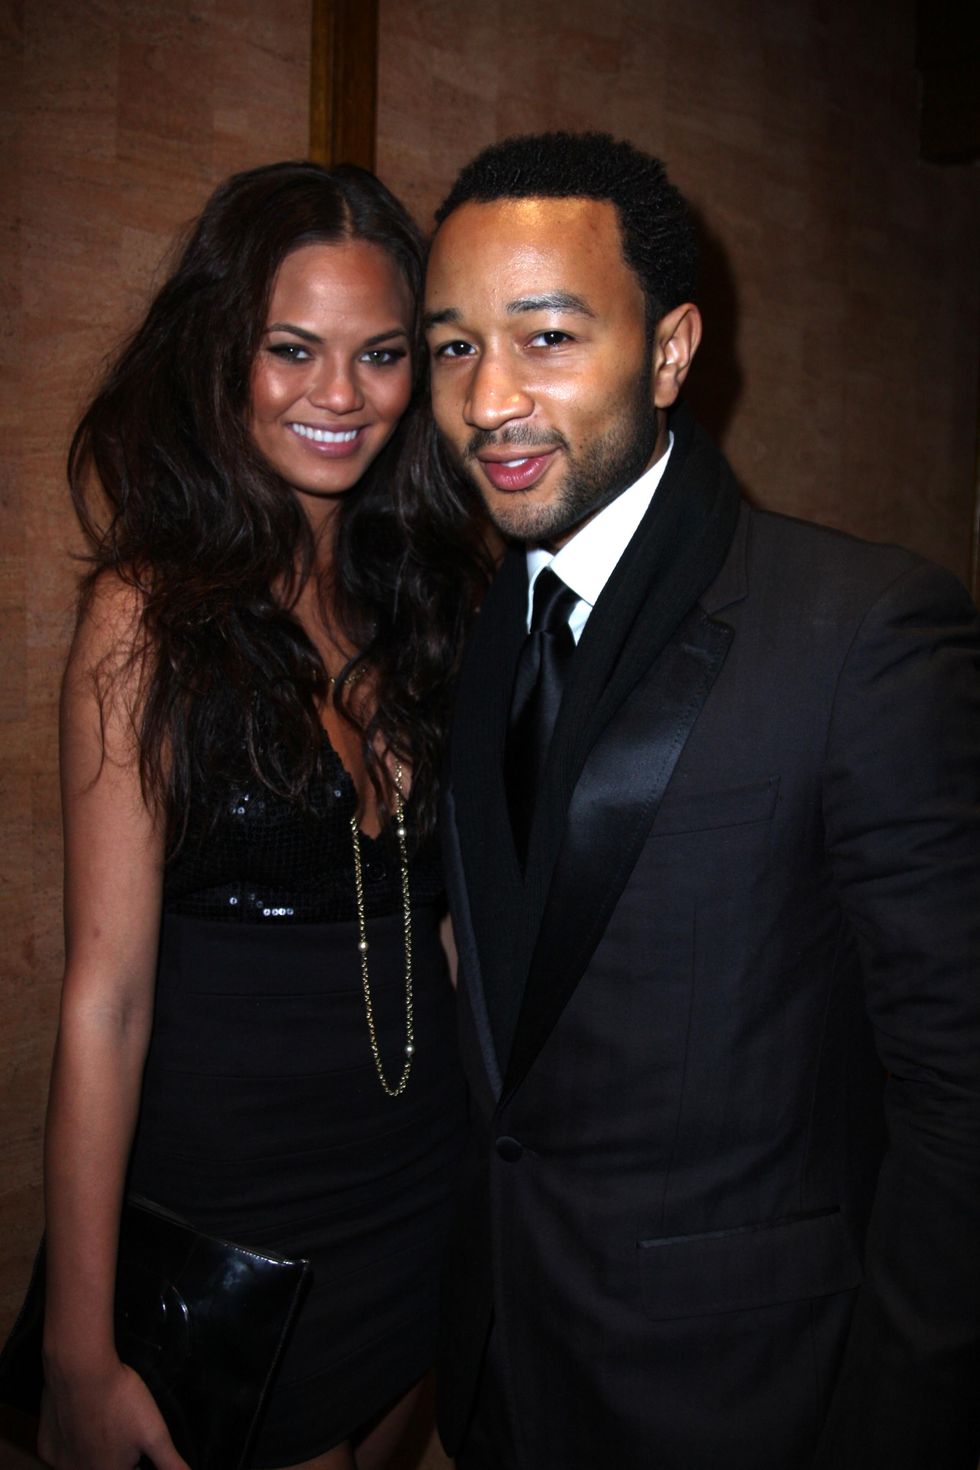 Chrissy Teigen and John Legend attend an Esquire Magazine New Year's Eve party at Cipriani Wall Street in New York City on December 31, 2007